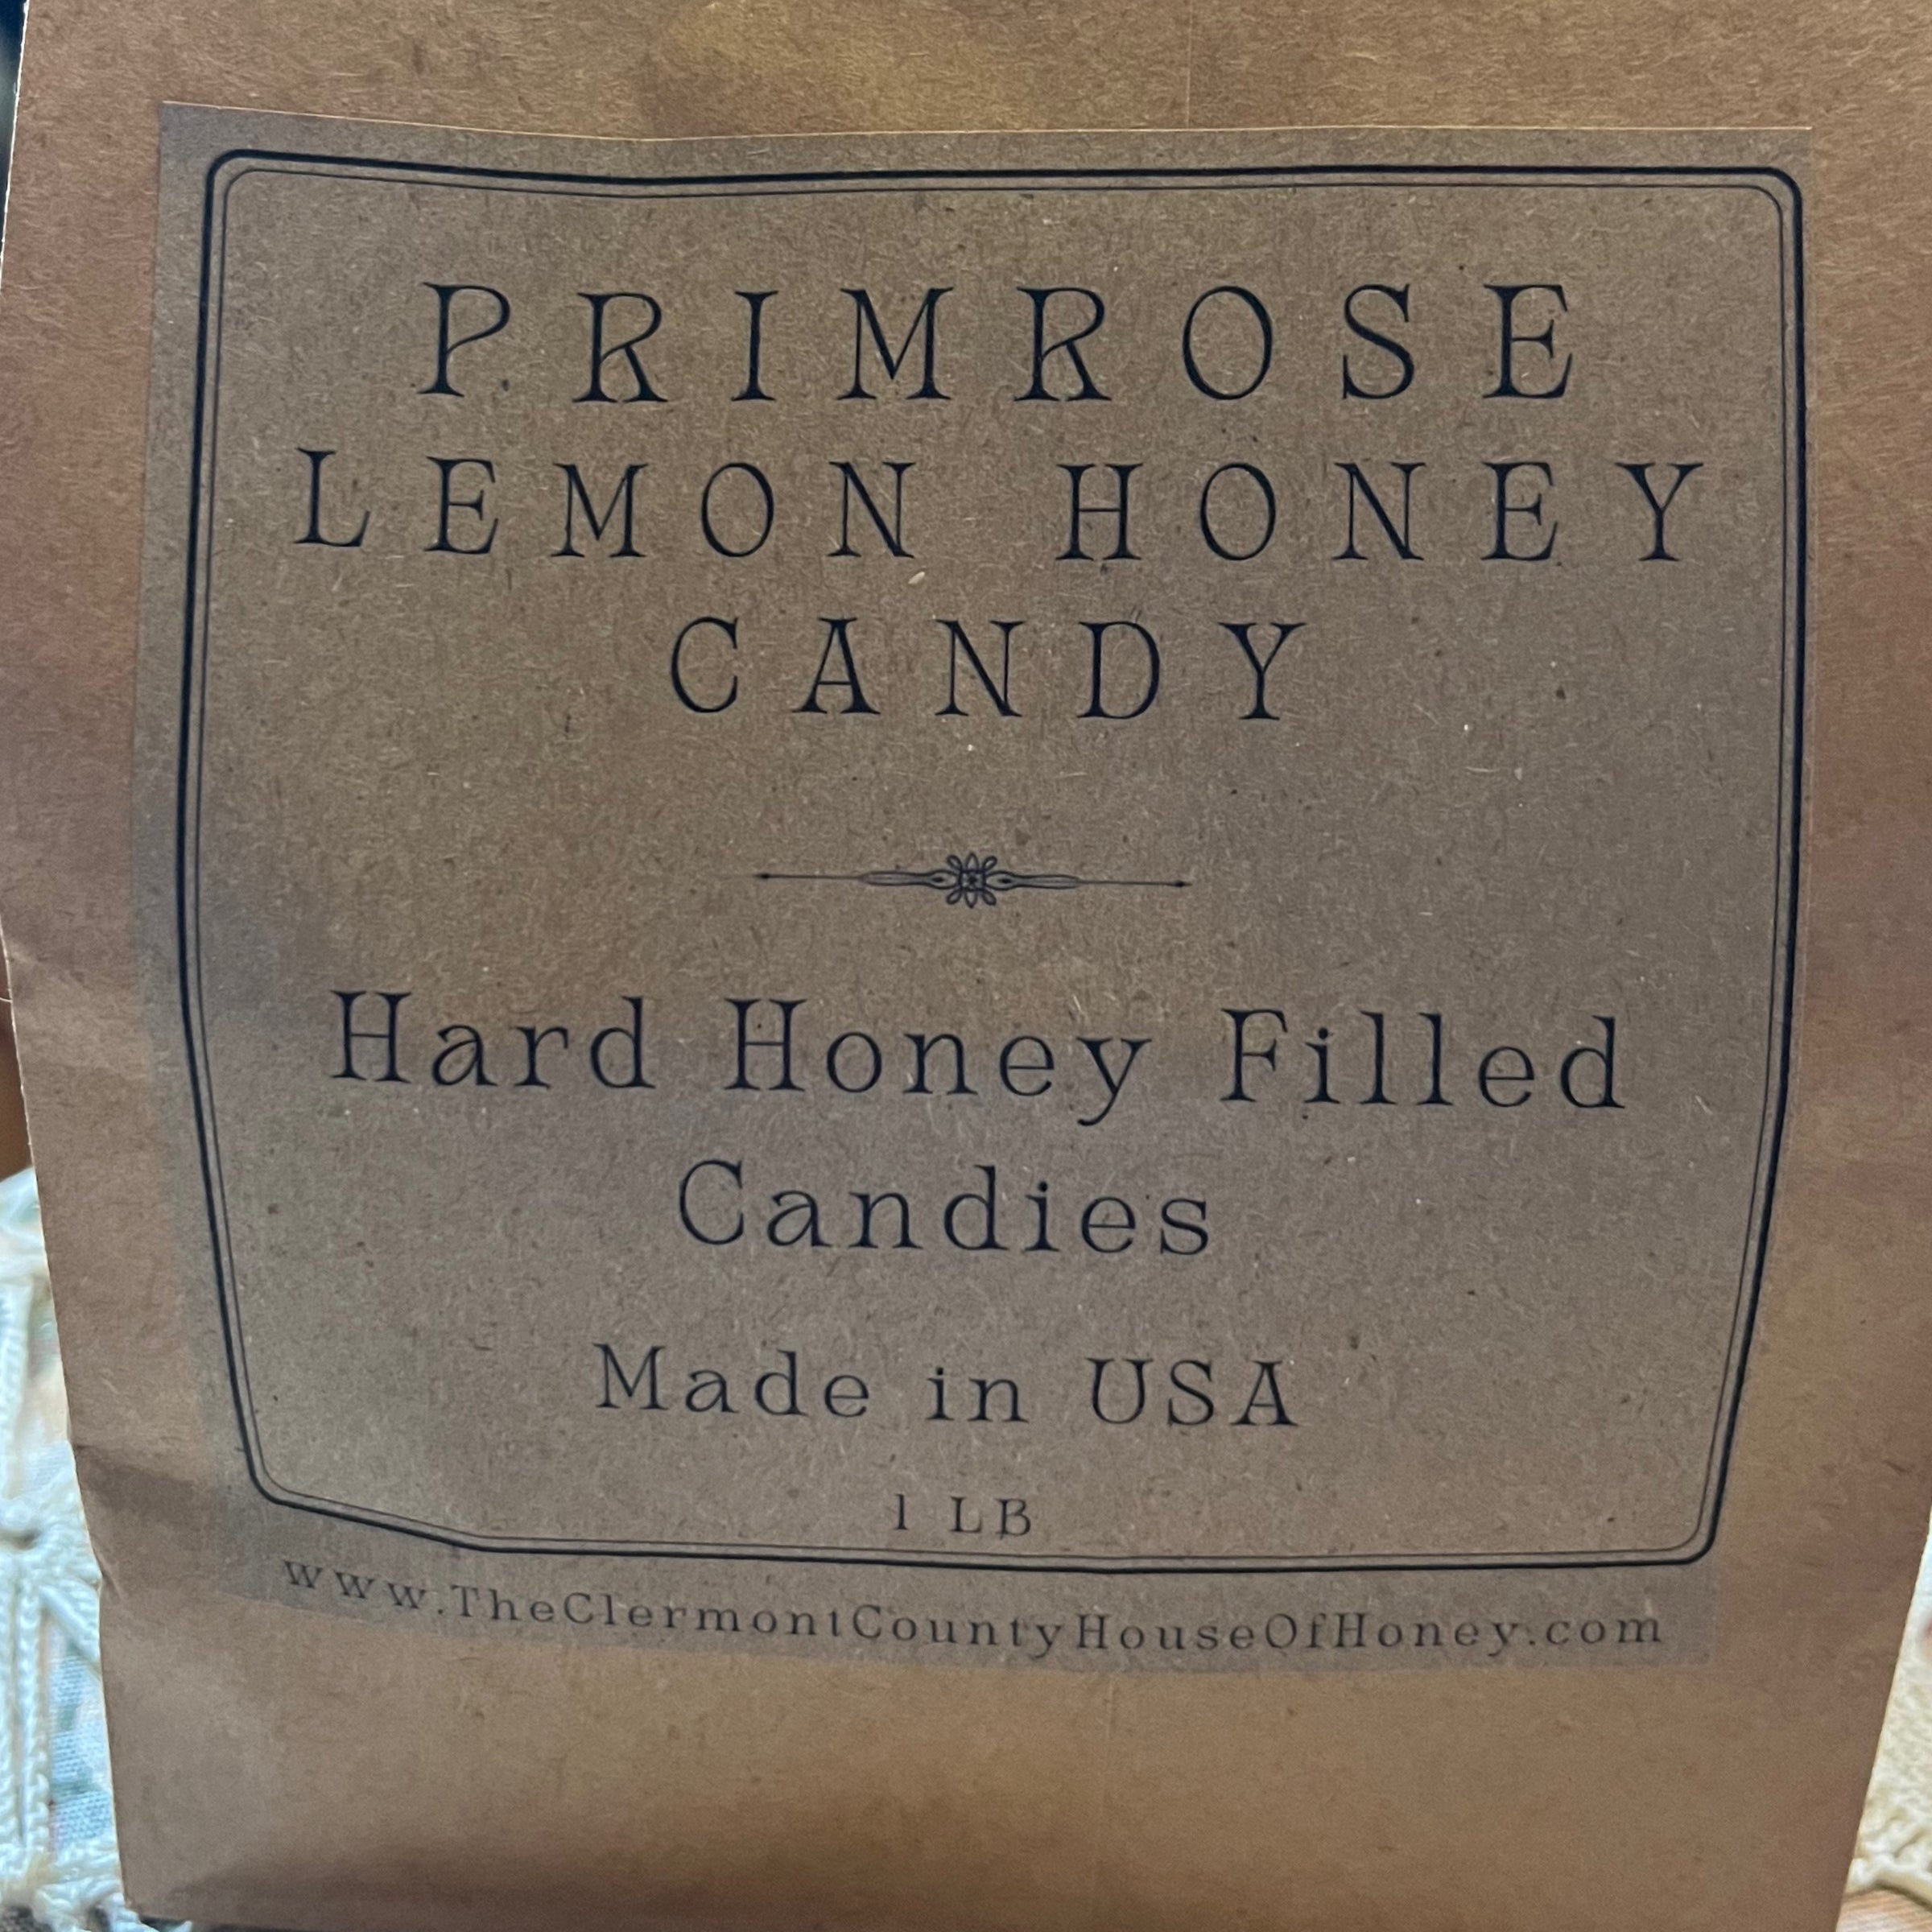 Honey filled candies